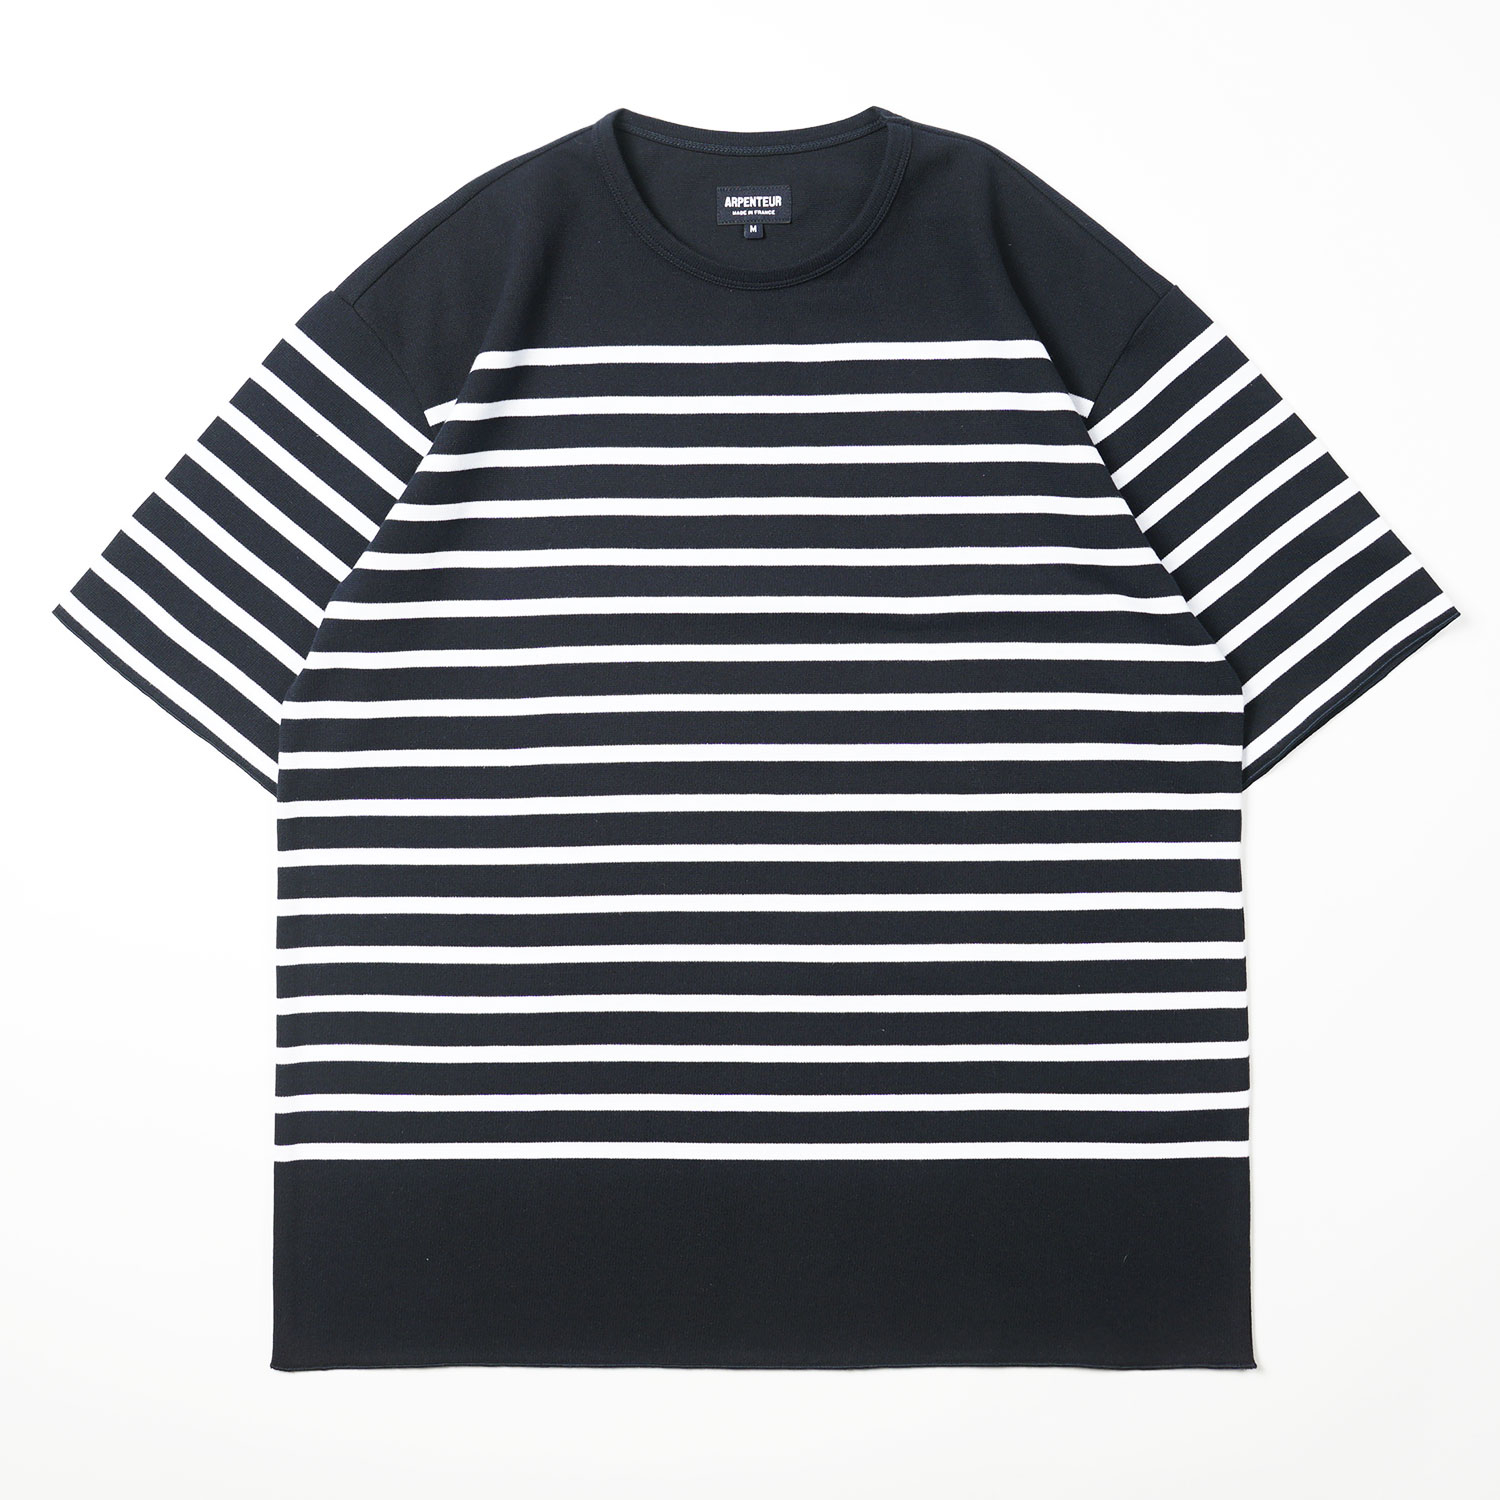 Pontus t-shirt in Navy White color by Arpenteur